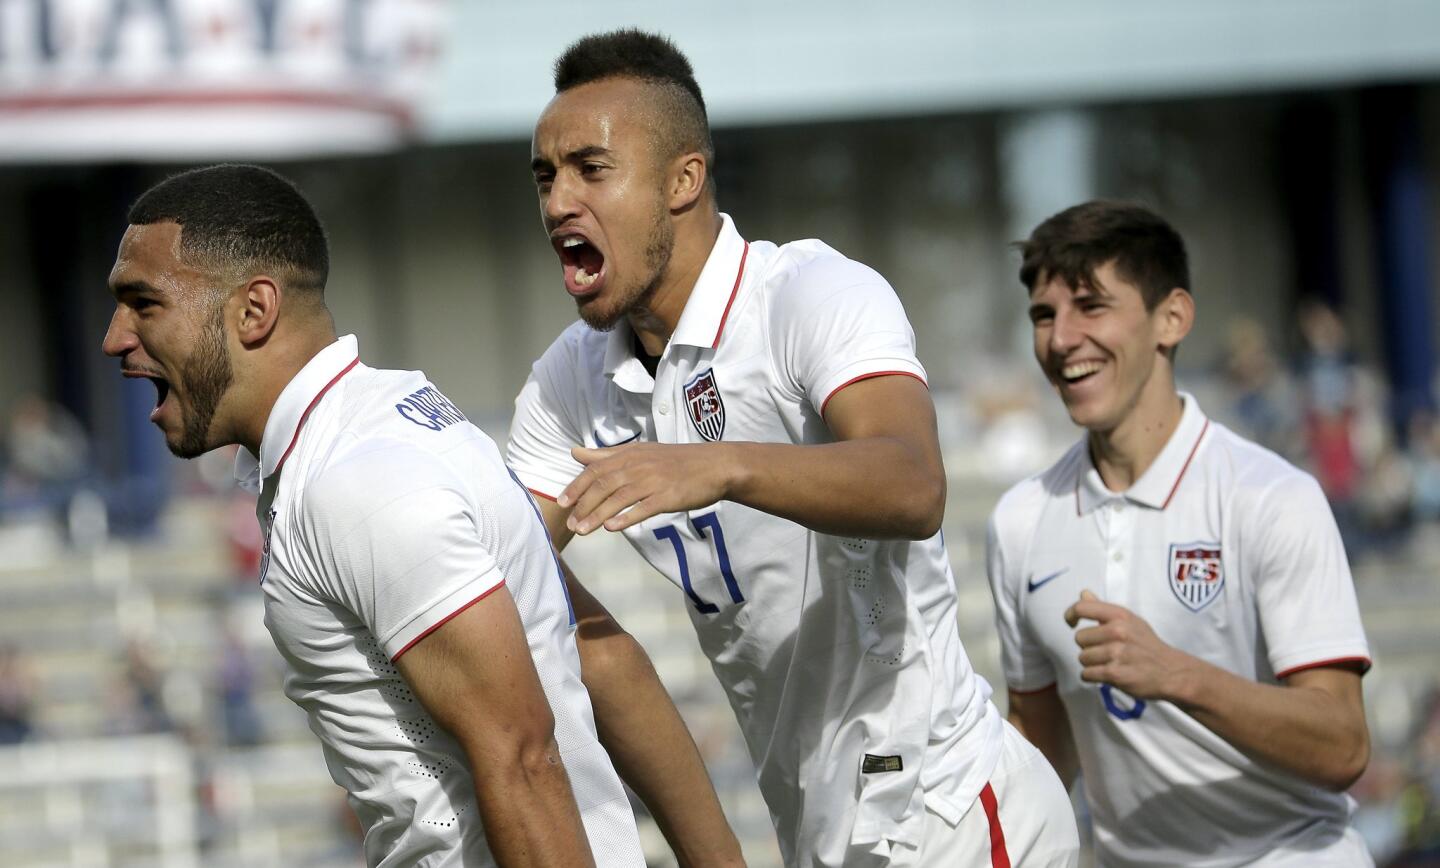 United States defender Cameron Carter-Vickers, left, celebrates with forward Jerome Kiesewetter (17) and midfielder Emerson Hyndman (8) after scoring a goal during the first half of a CONCACAF men's Olympic qualifying soccer match against Cuba, Saturday, Oct. 3, 2015, in Kansas City, Kan. (AP Photo/Charlie Riedel)